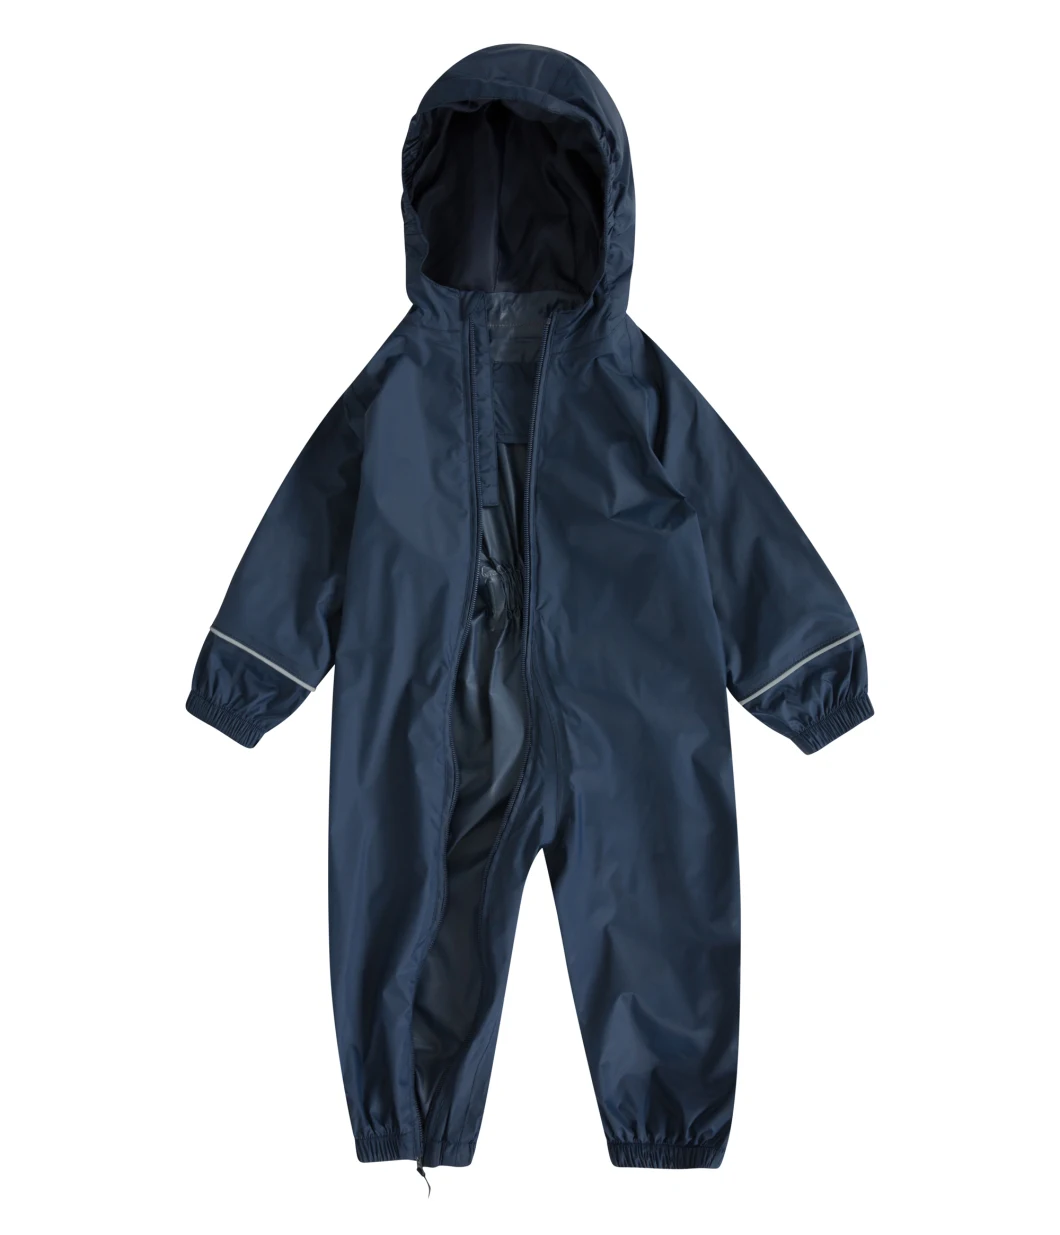 Wholesale Kids/Toddler/Childrens Waterproof Coat Puddle Rain Suit All in One PVC Raincoat